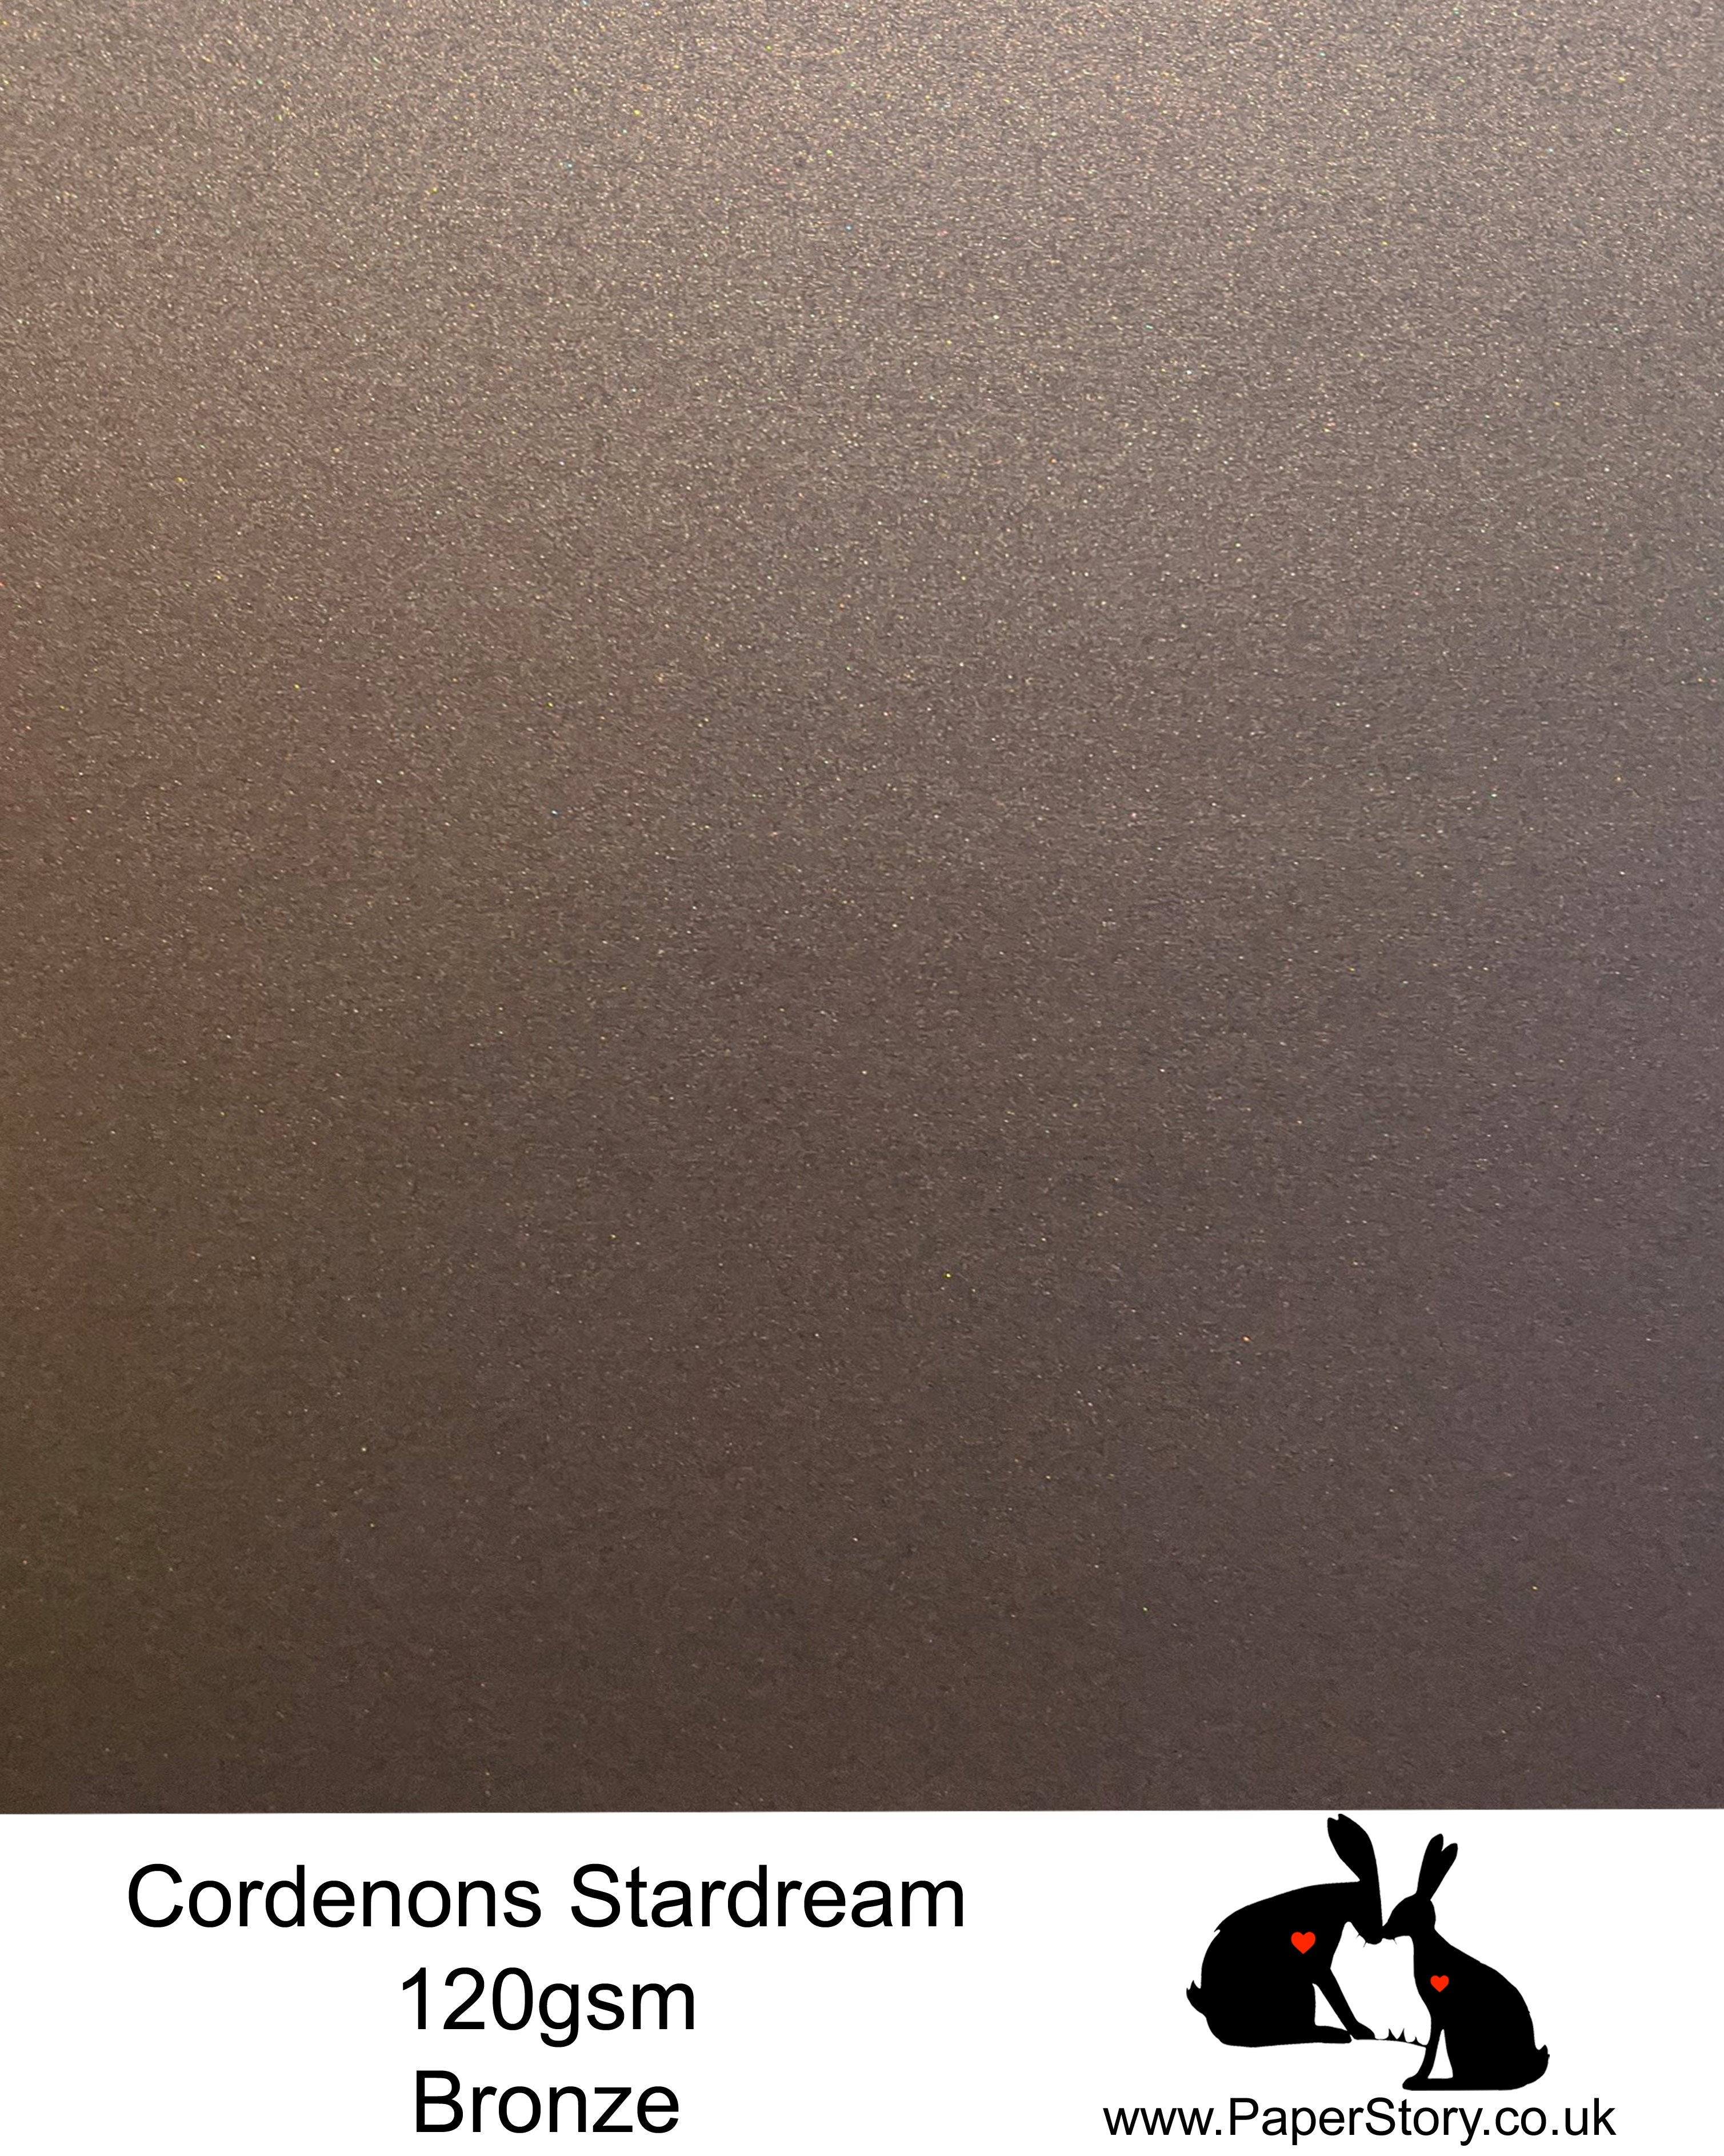 A4 Stardream 120gsm paper for Papercutting, craft, flower making  and wedding stationery. Bronze, is a stunning chocolate brown and has beautiful warm undertones with shimmering light reflection with a hint of gold. Stardream is a luxury Italian paper from Italy, it is a double sided quality Pearlescent paper with a matching colour core. FSC Certified, acid free, archival and PH Neutral